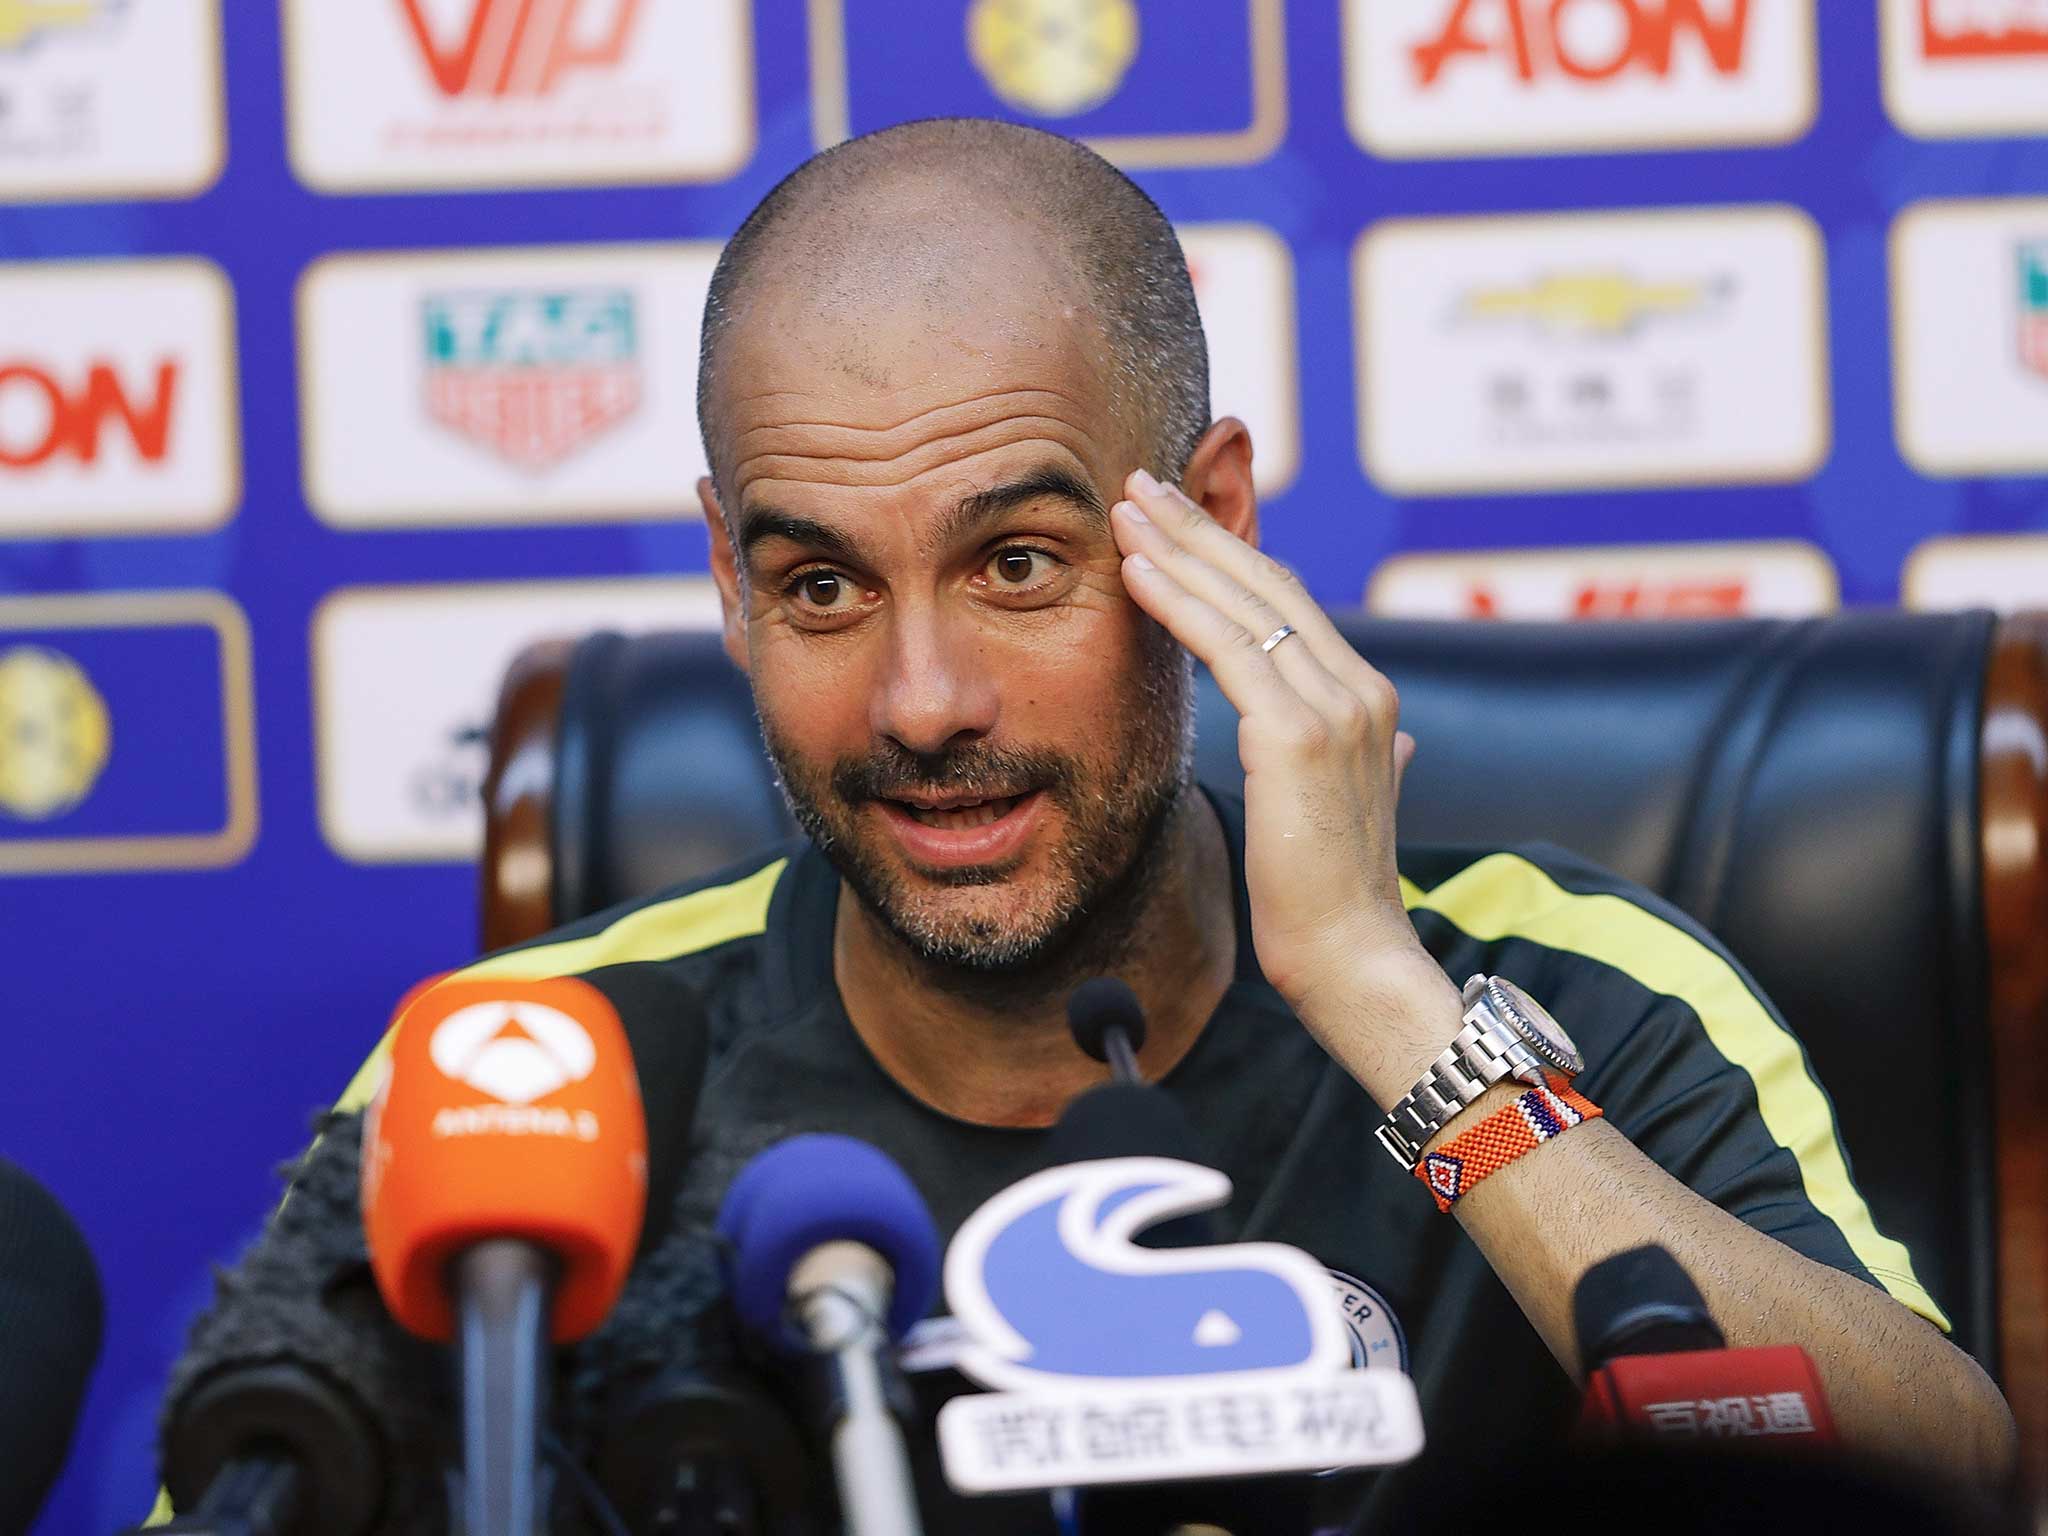 Pep Guardiola talks to the media in Asia on Manchester City's tour of the region